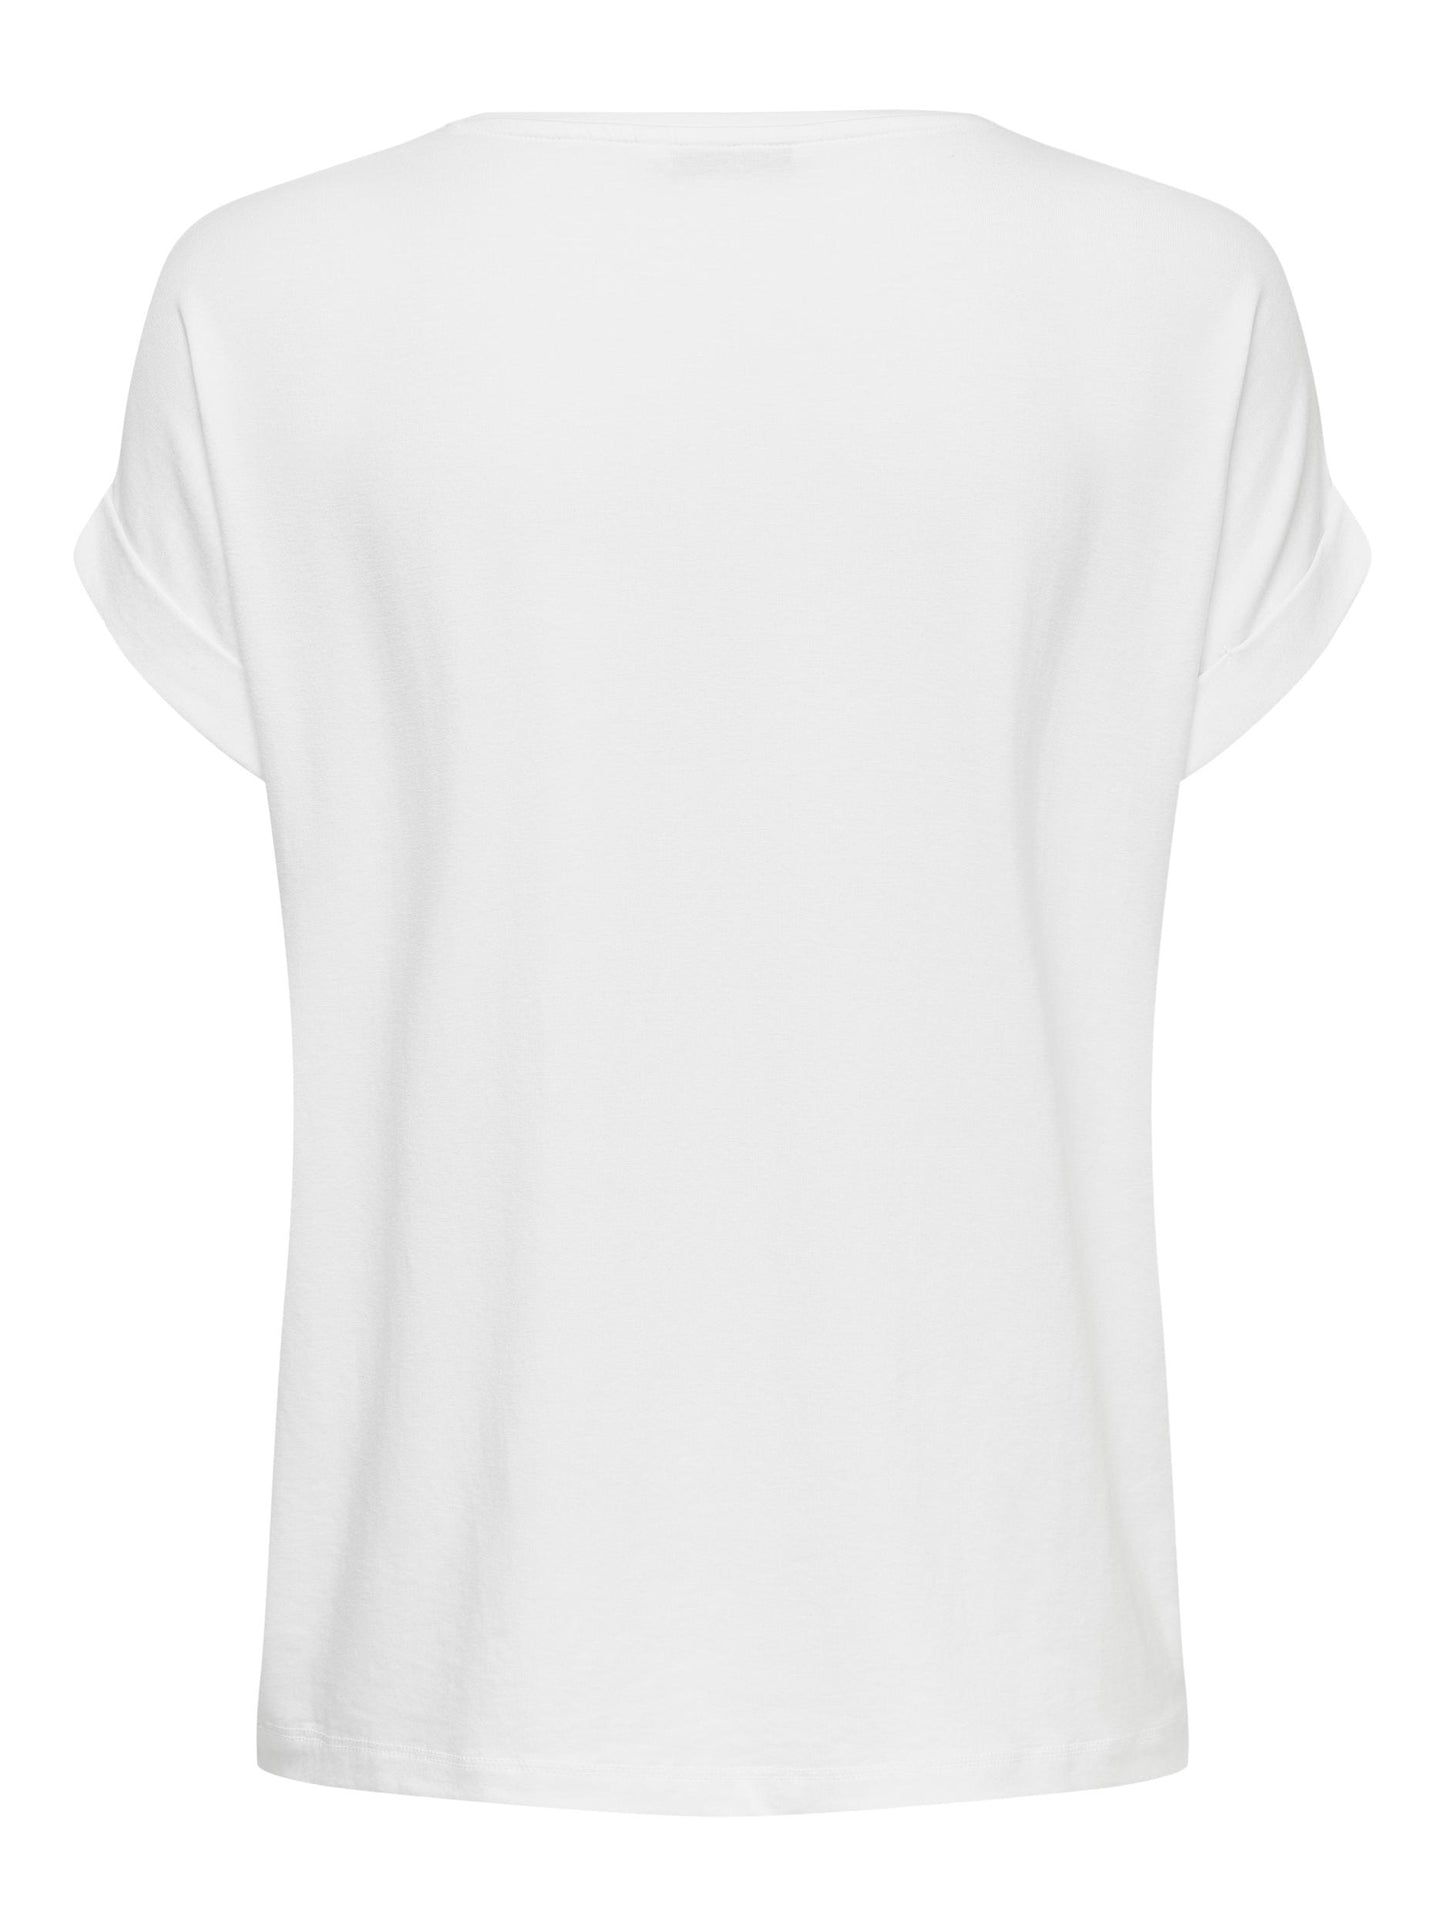 Moster T-Shirt - White